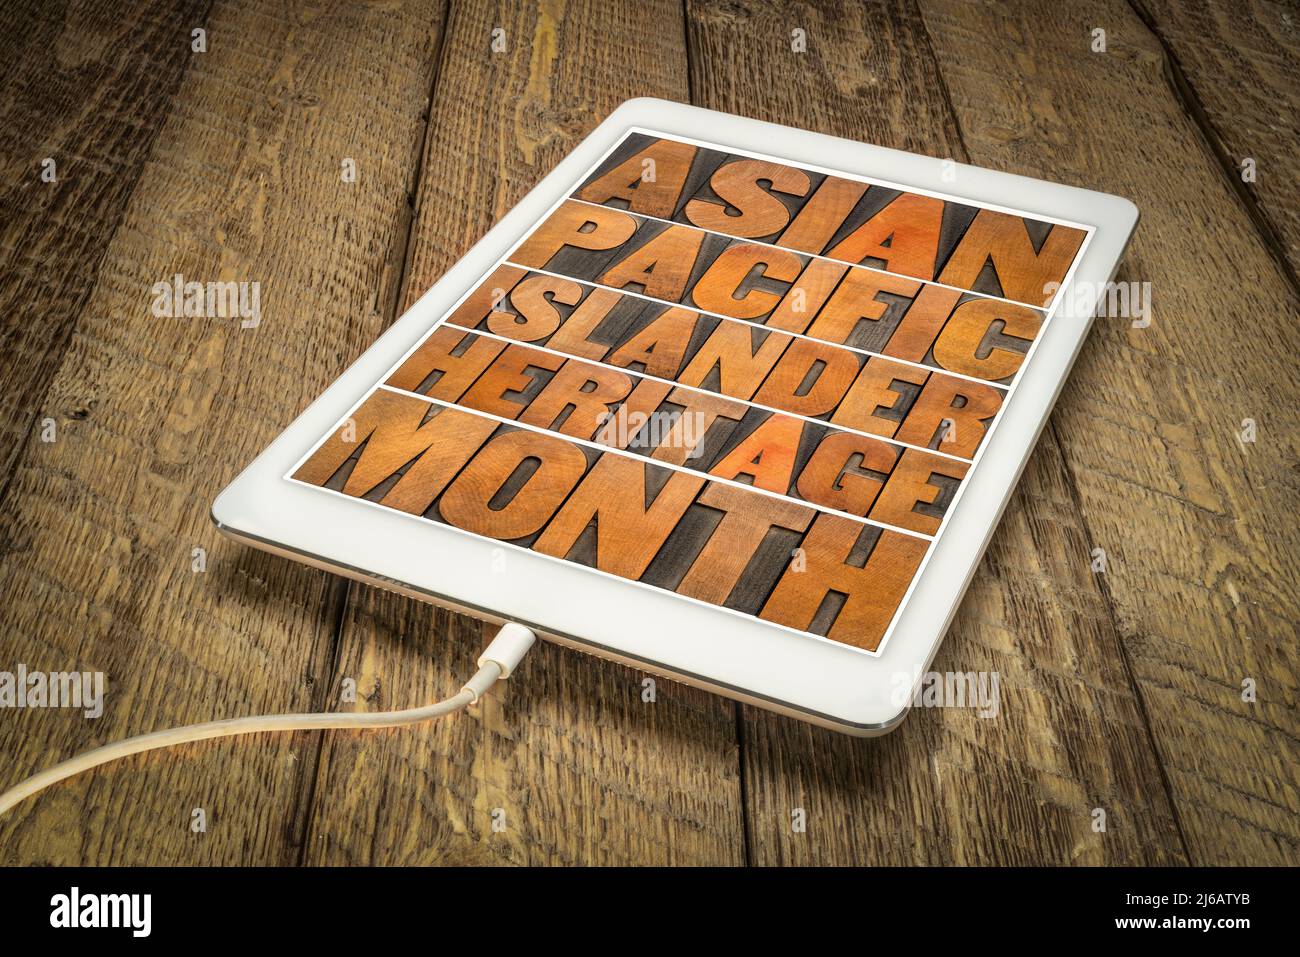 Asian Pacific Islander Heritage Month - word abstract in vintage letterpress wood type on a digital tablet, reminder of cultural event Stock Photo